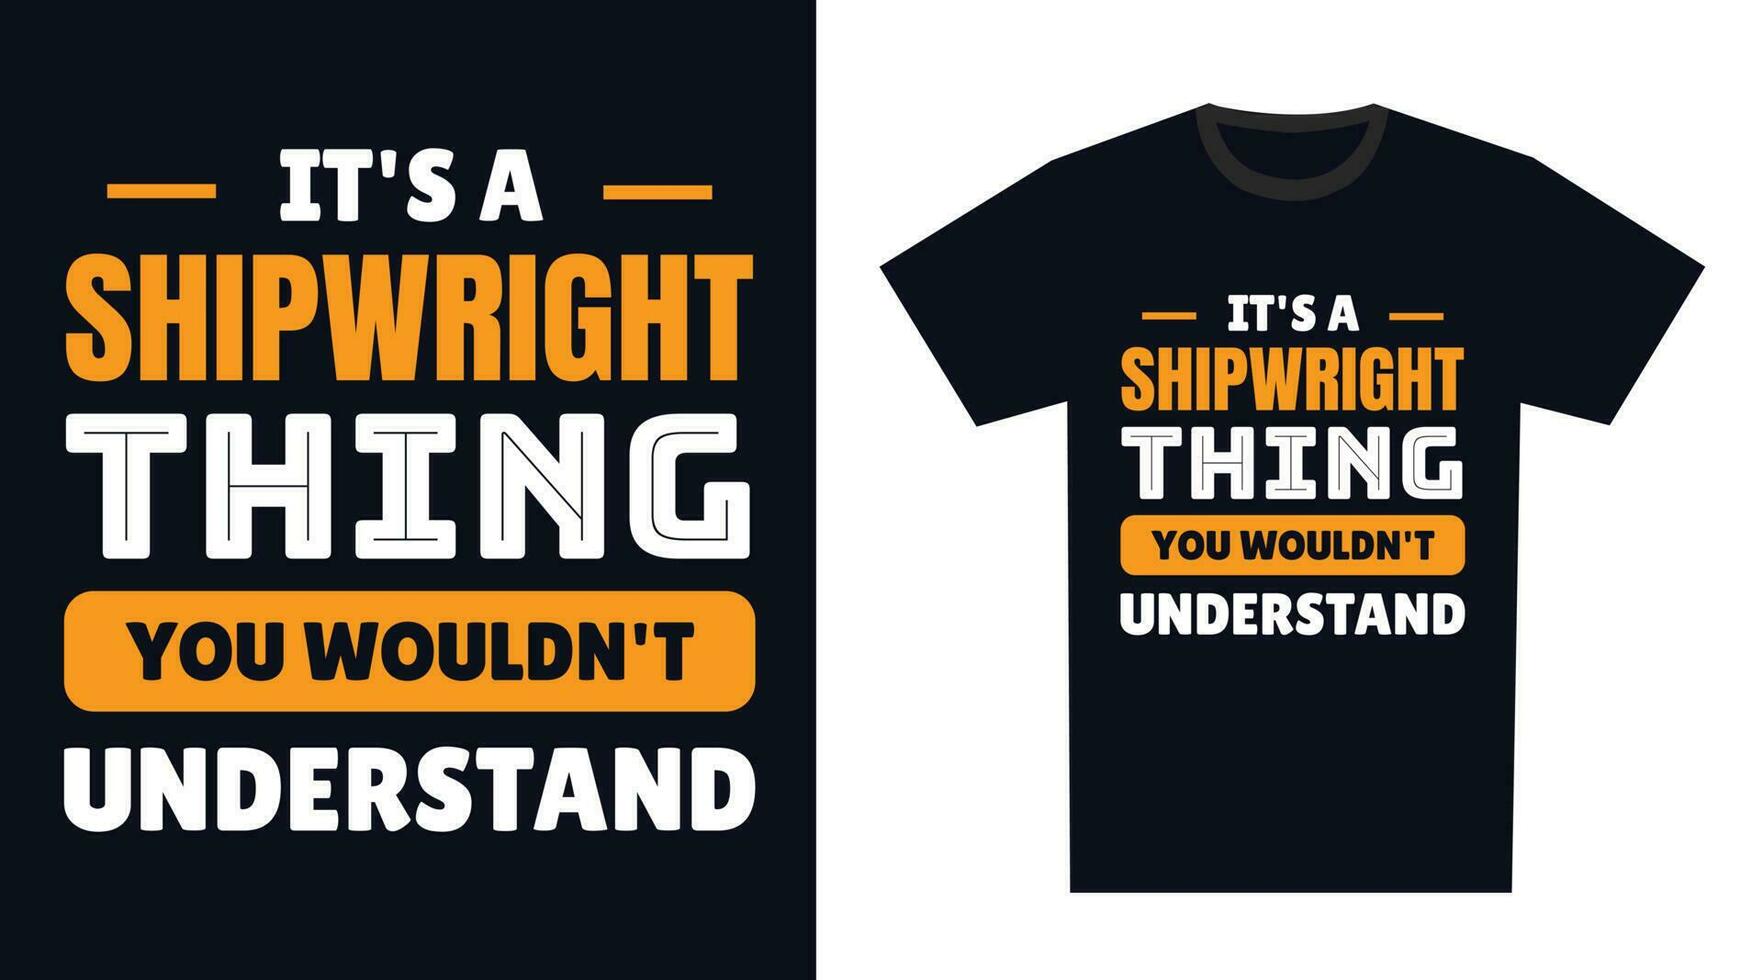 Shipwright T Shirt Design. It's a Shipwright Thing, You Wouldn't Understand vector